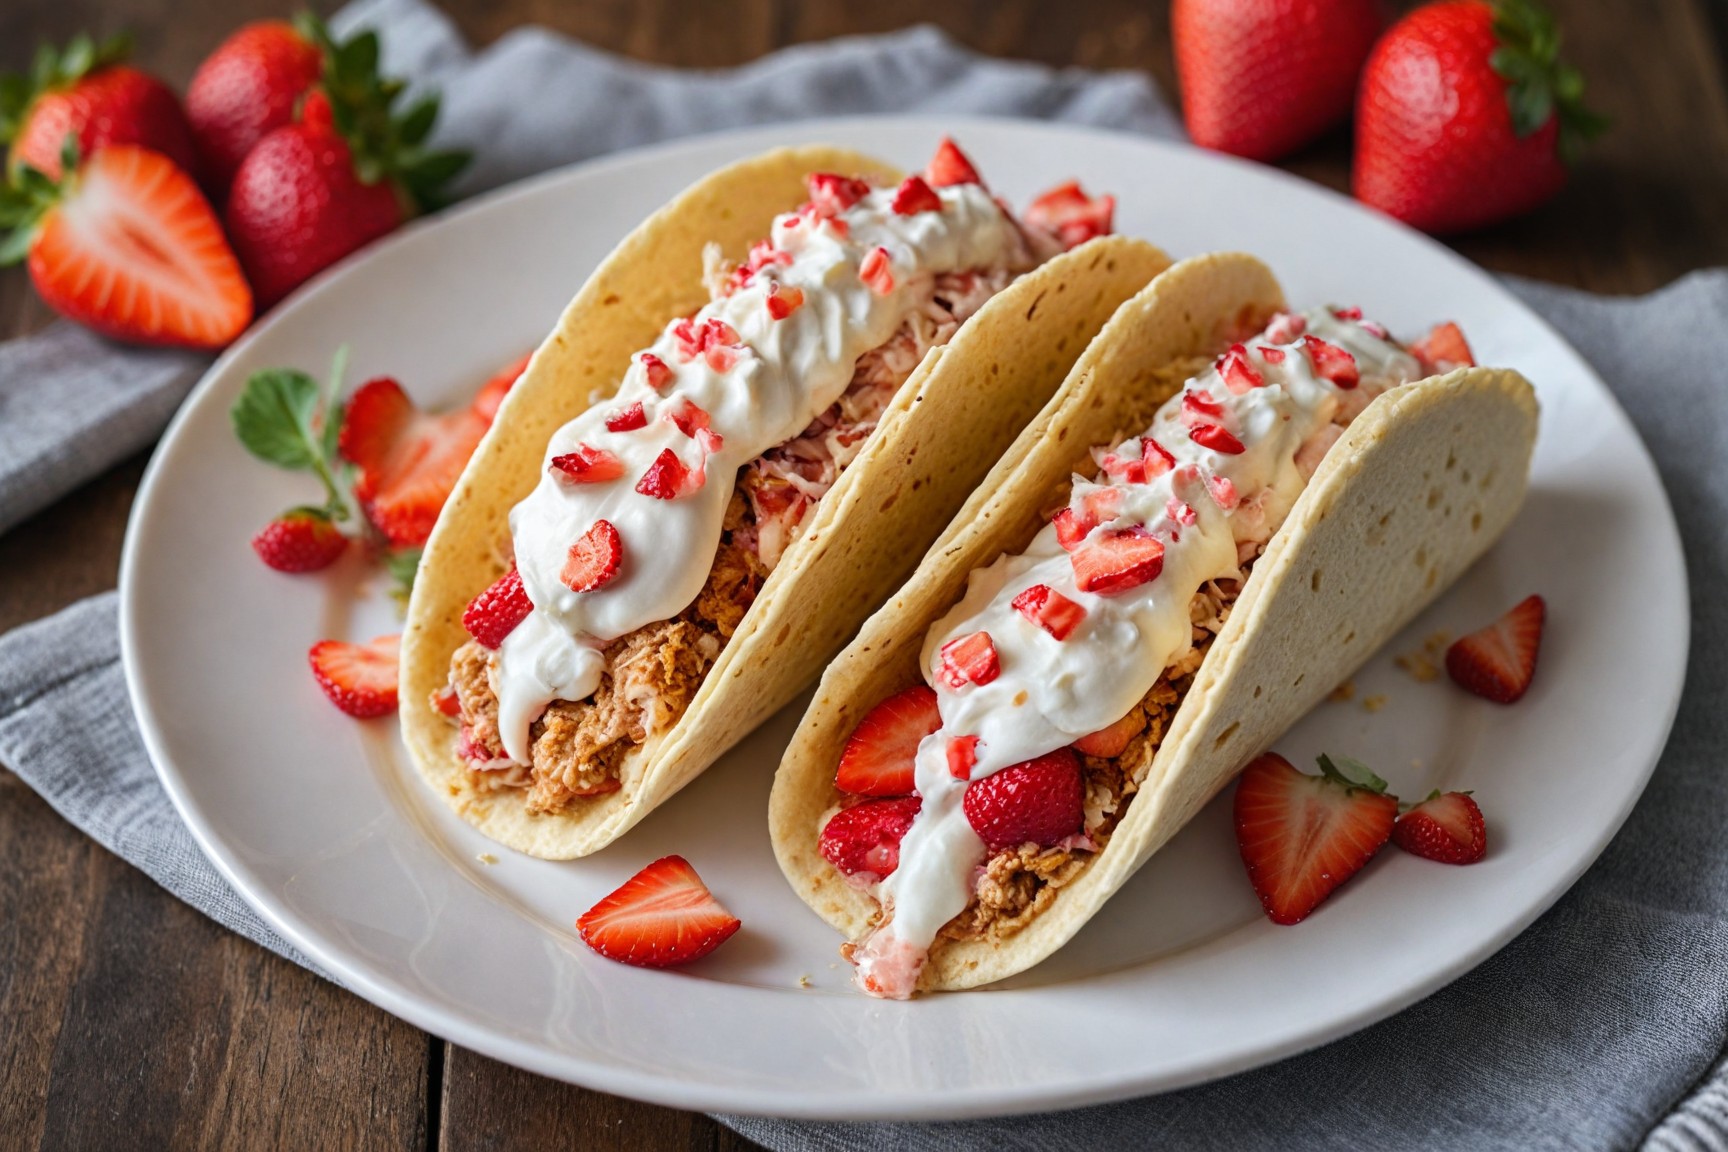 Strawberry Cheesecake Tacos served on a plate